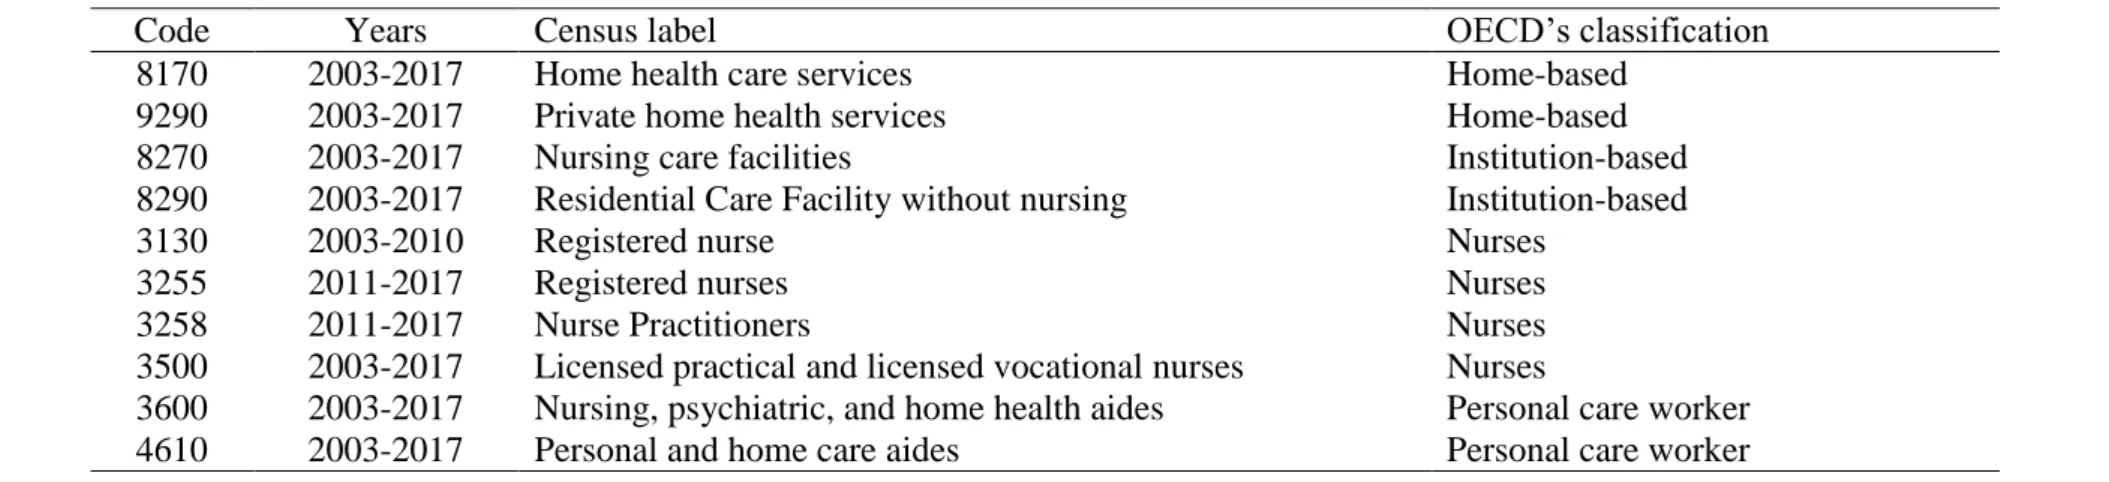 Table 1: Industry and occupation codes for LTC workforce (OECD’s definition) 